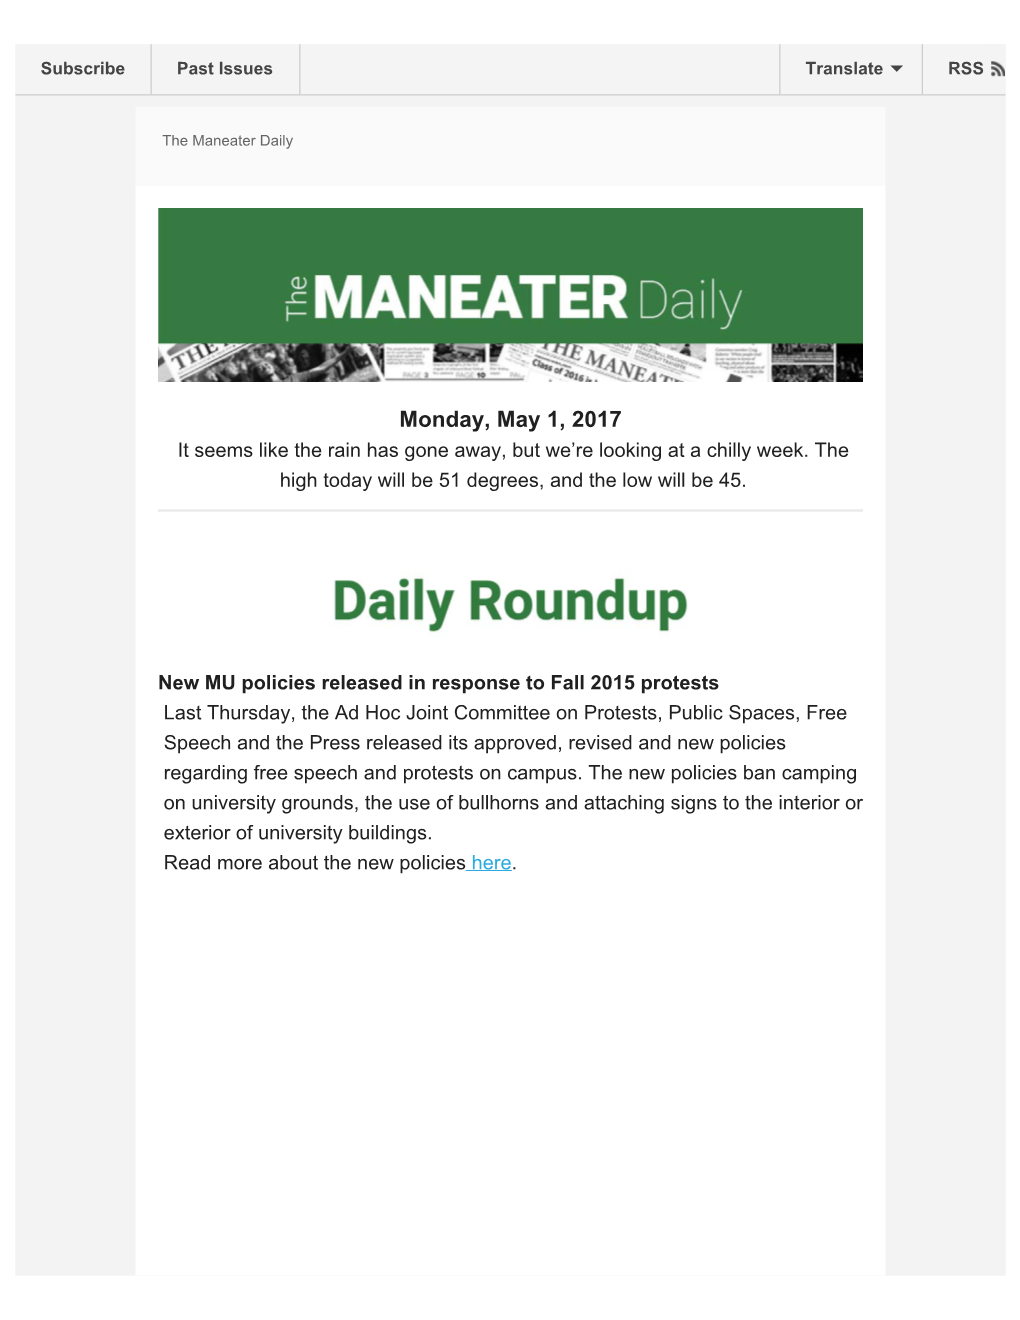 The Maneater Daily